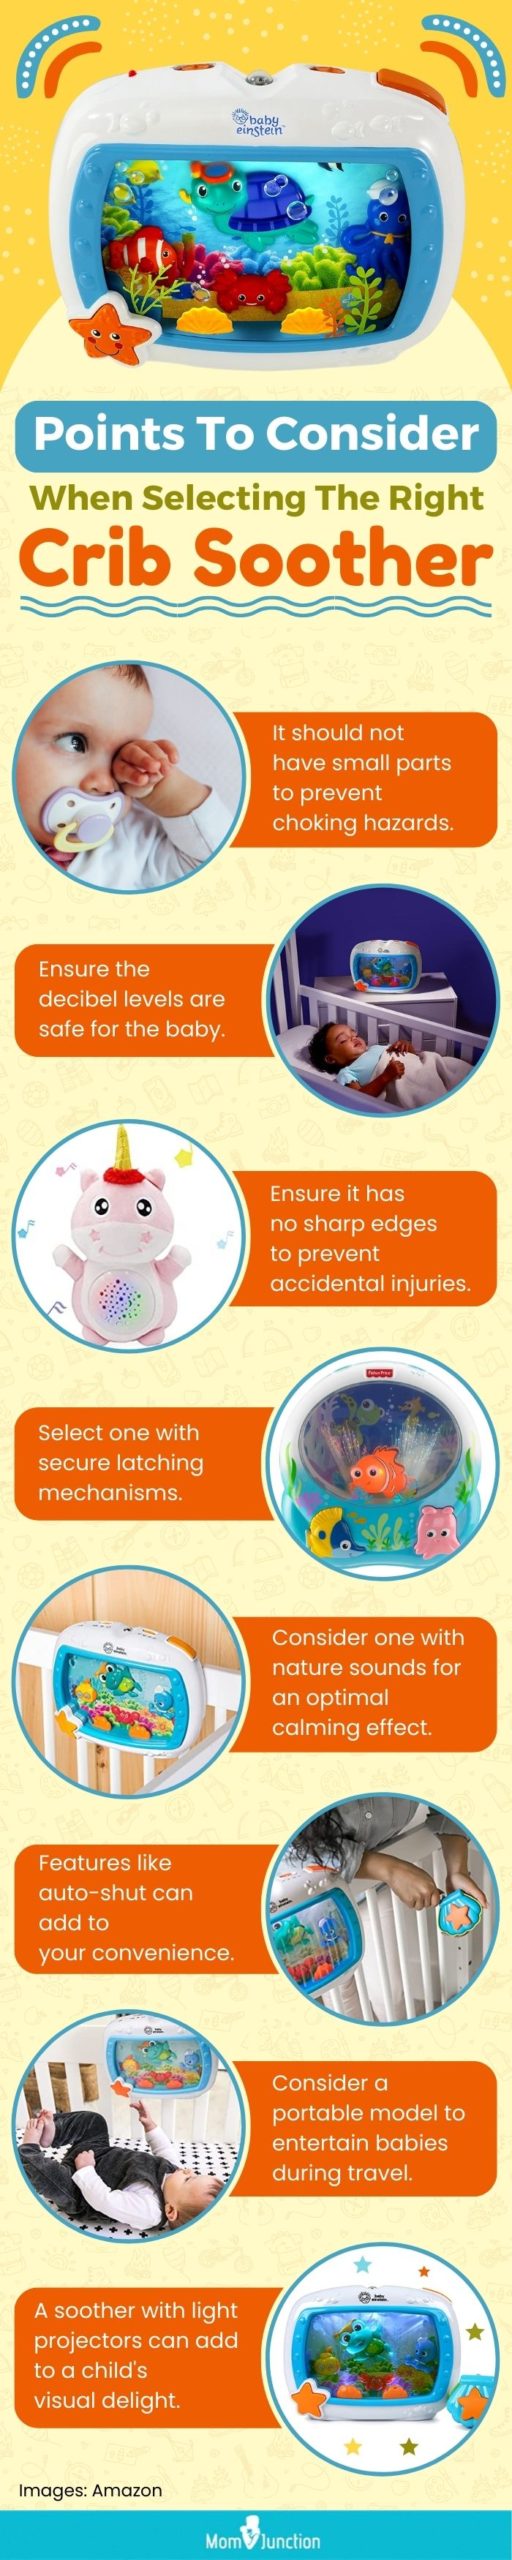 Points To Consider When Selecting The Right Crib Soother (infographic)